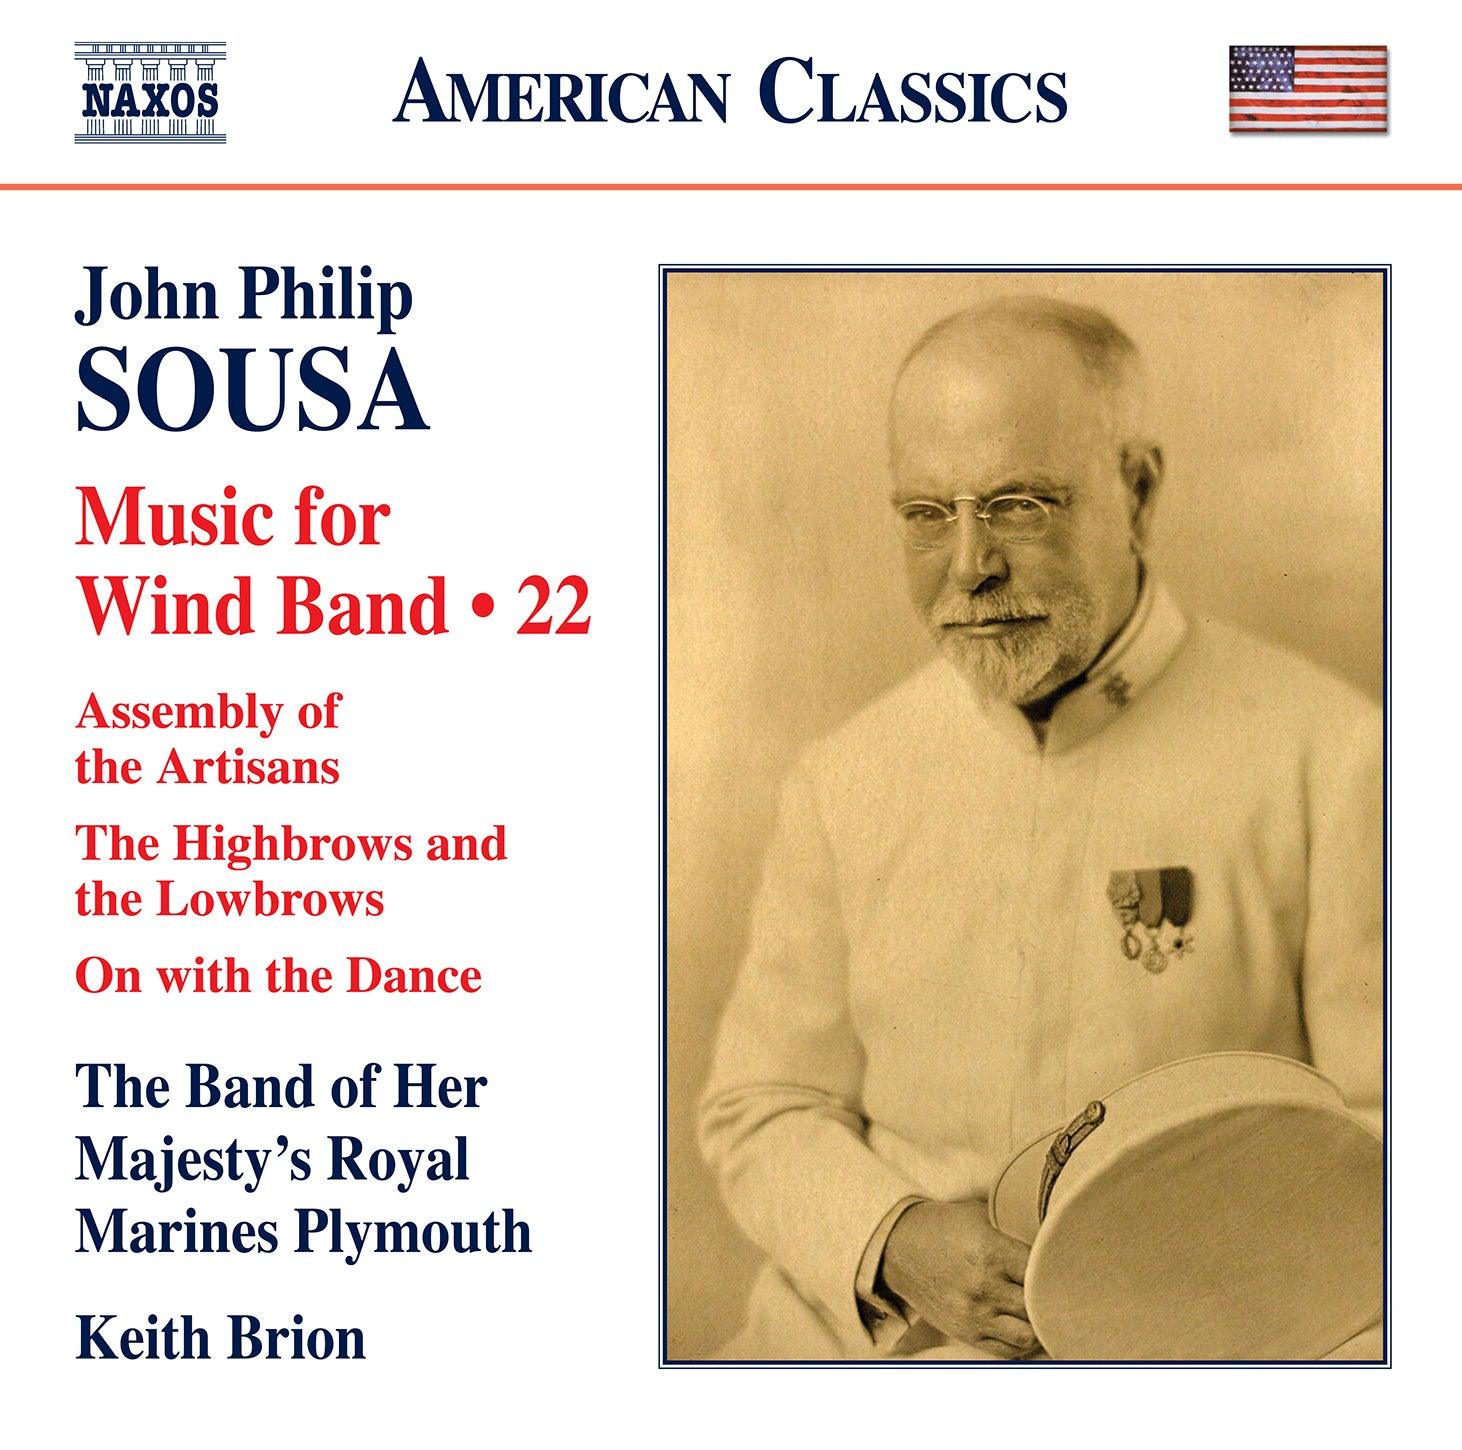 Sousa: Music for Wind Band, Vol.  22 / Brion, Her Majesty's Royal Marines Band - Plymouth - ArkivMusic